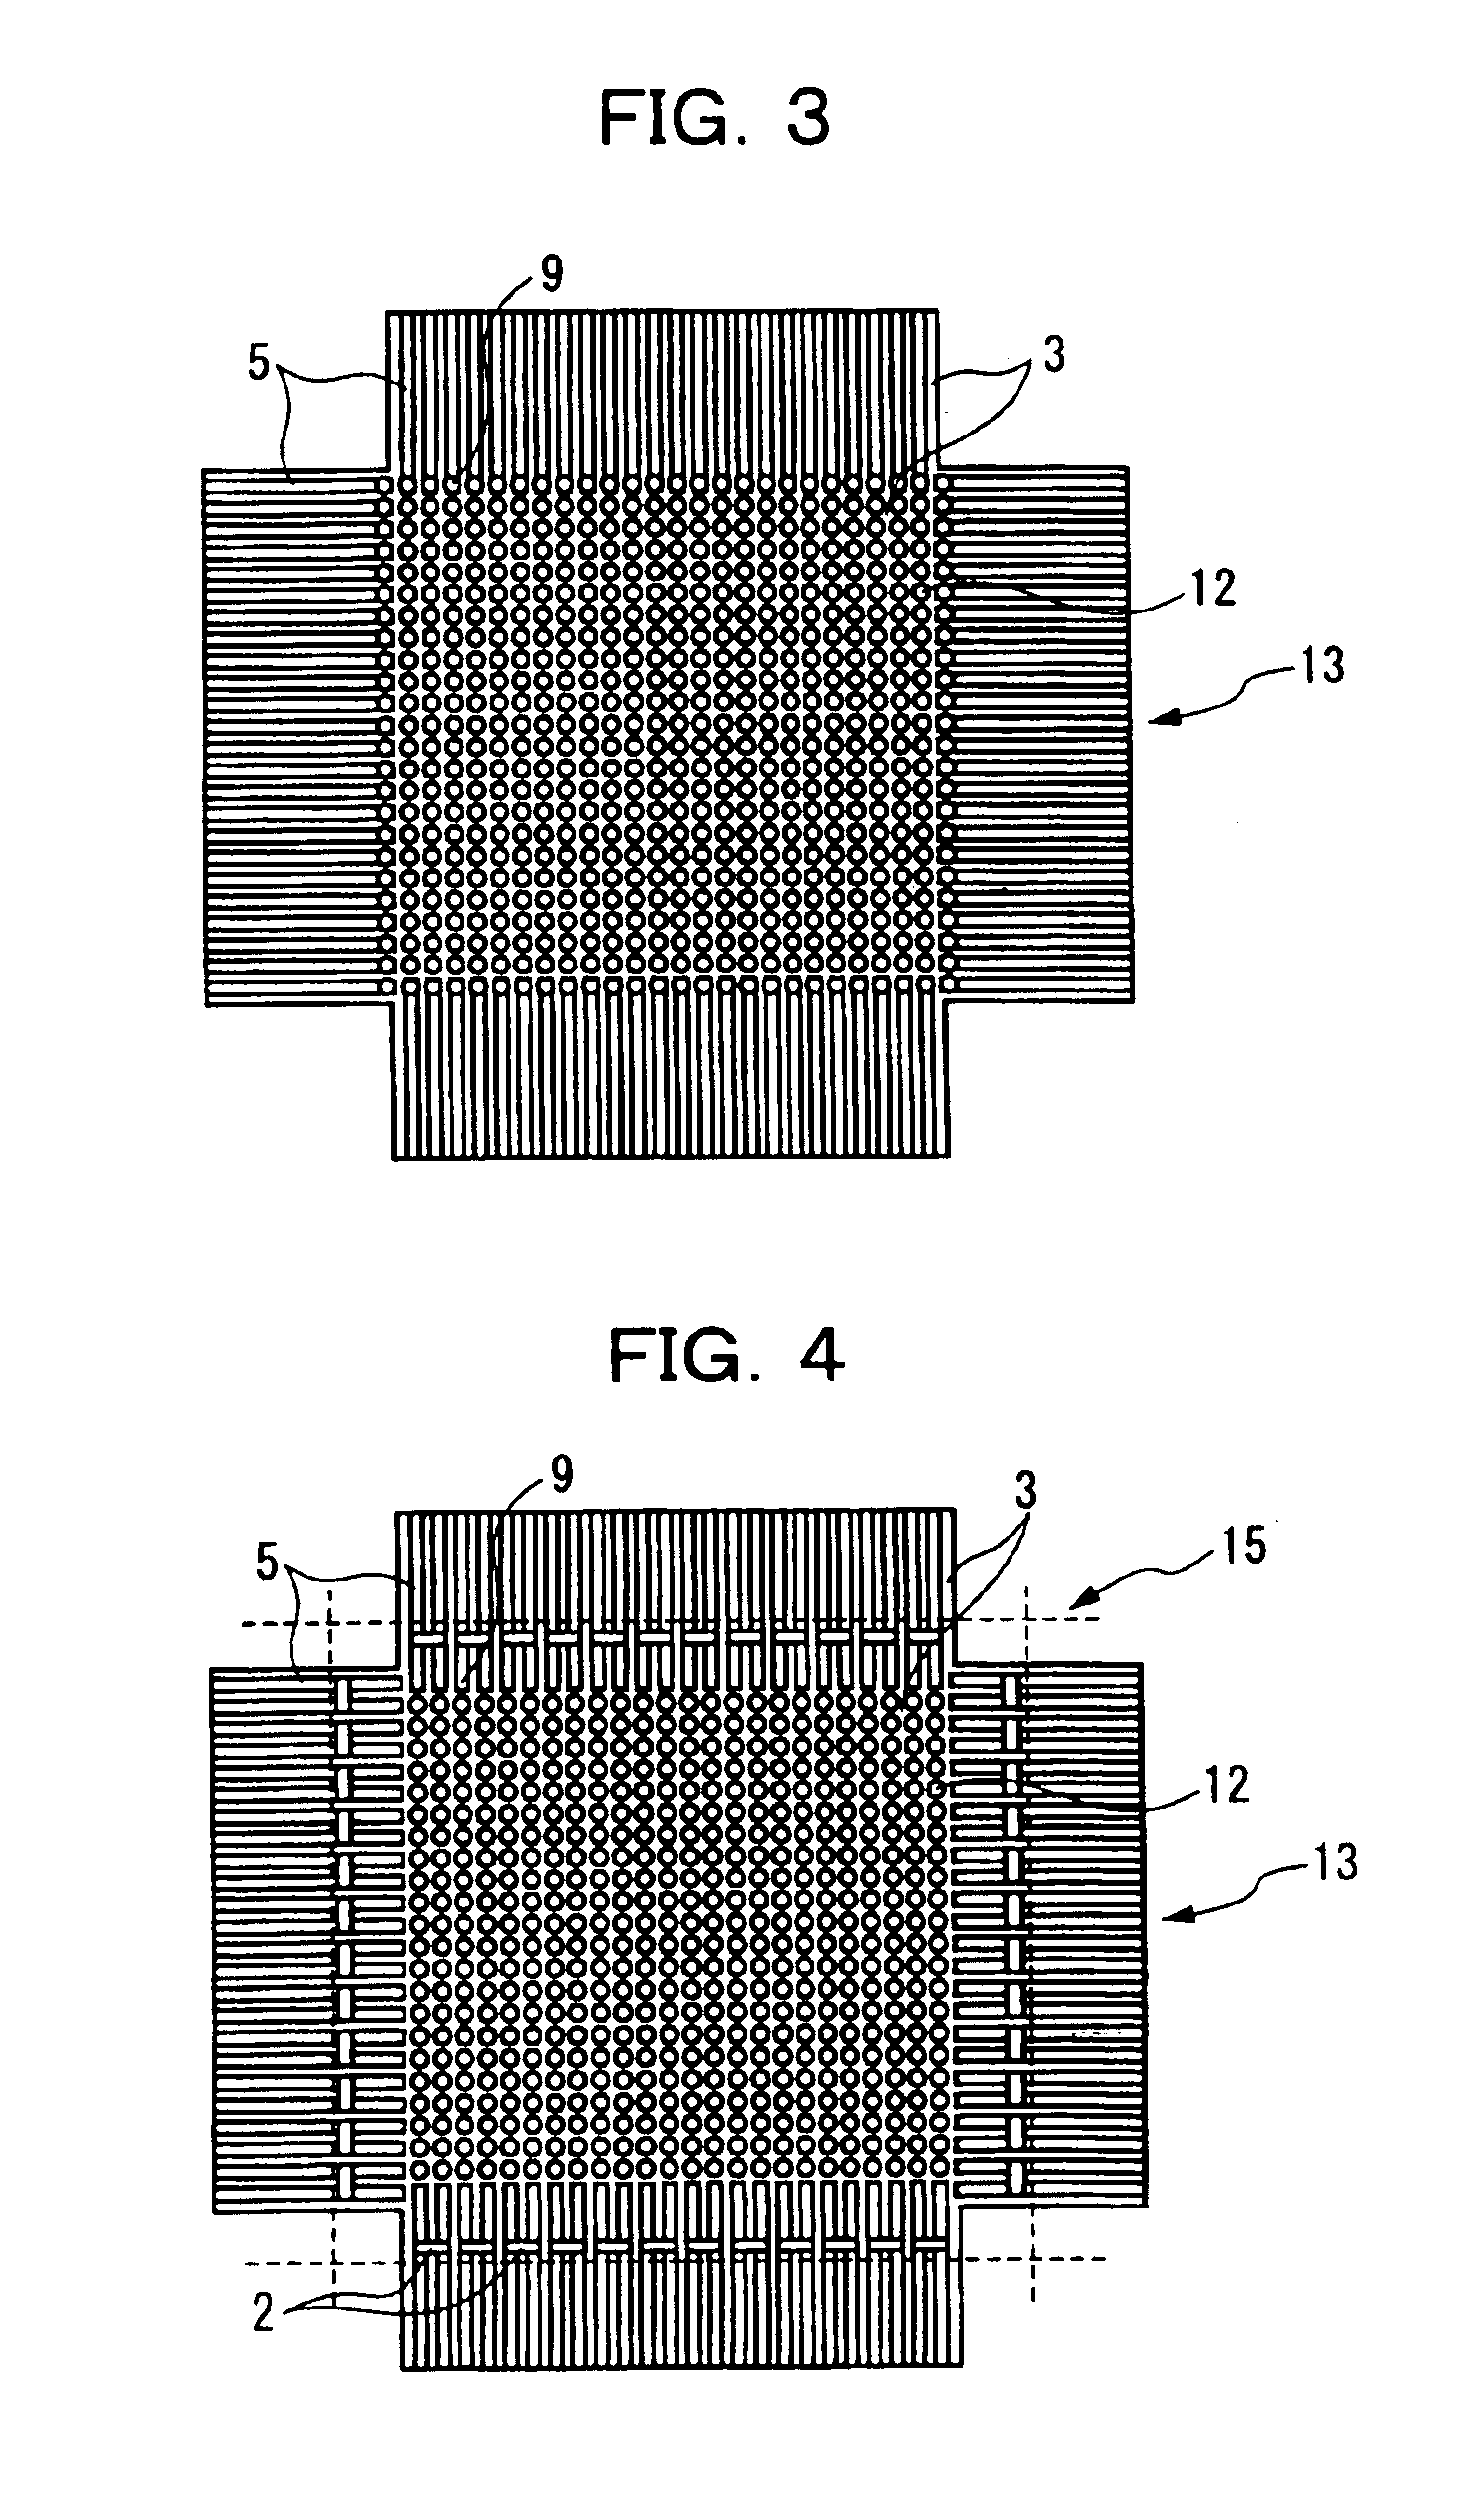 Semiconductor device with decoupling capacitors mounted on conductors